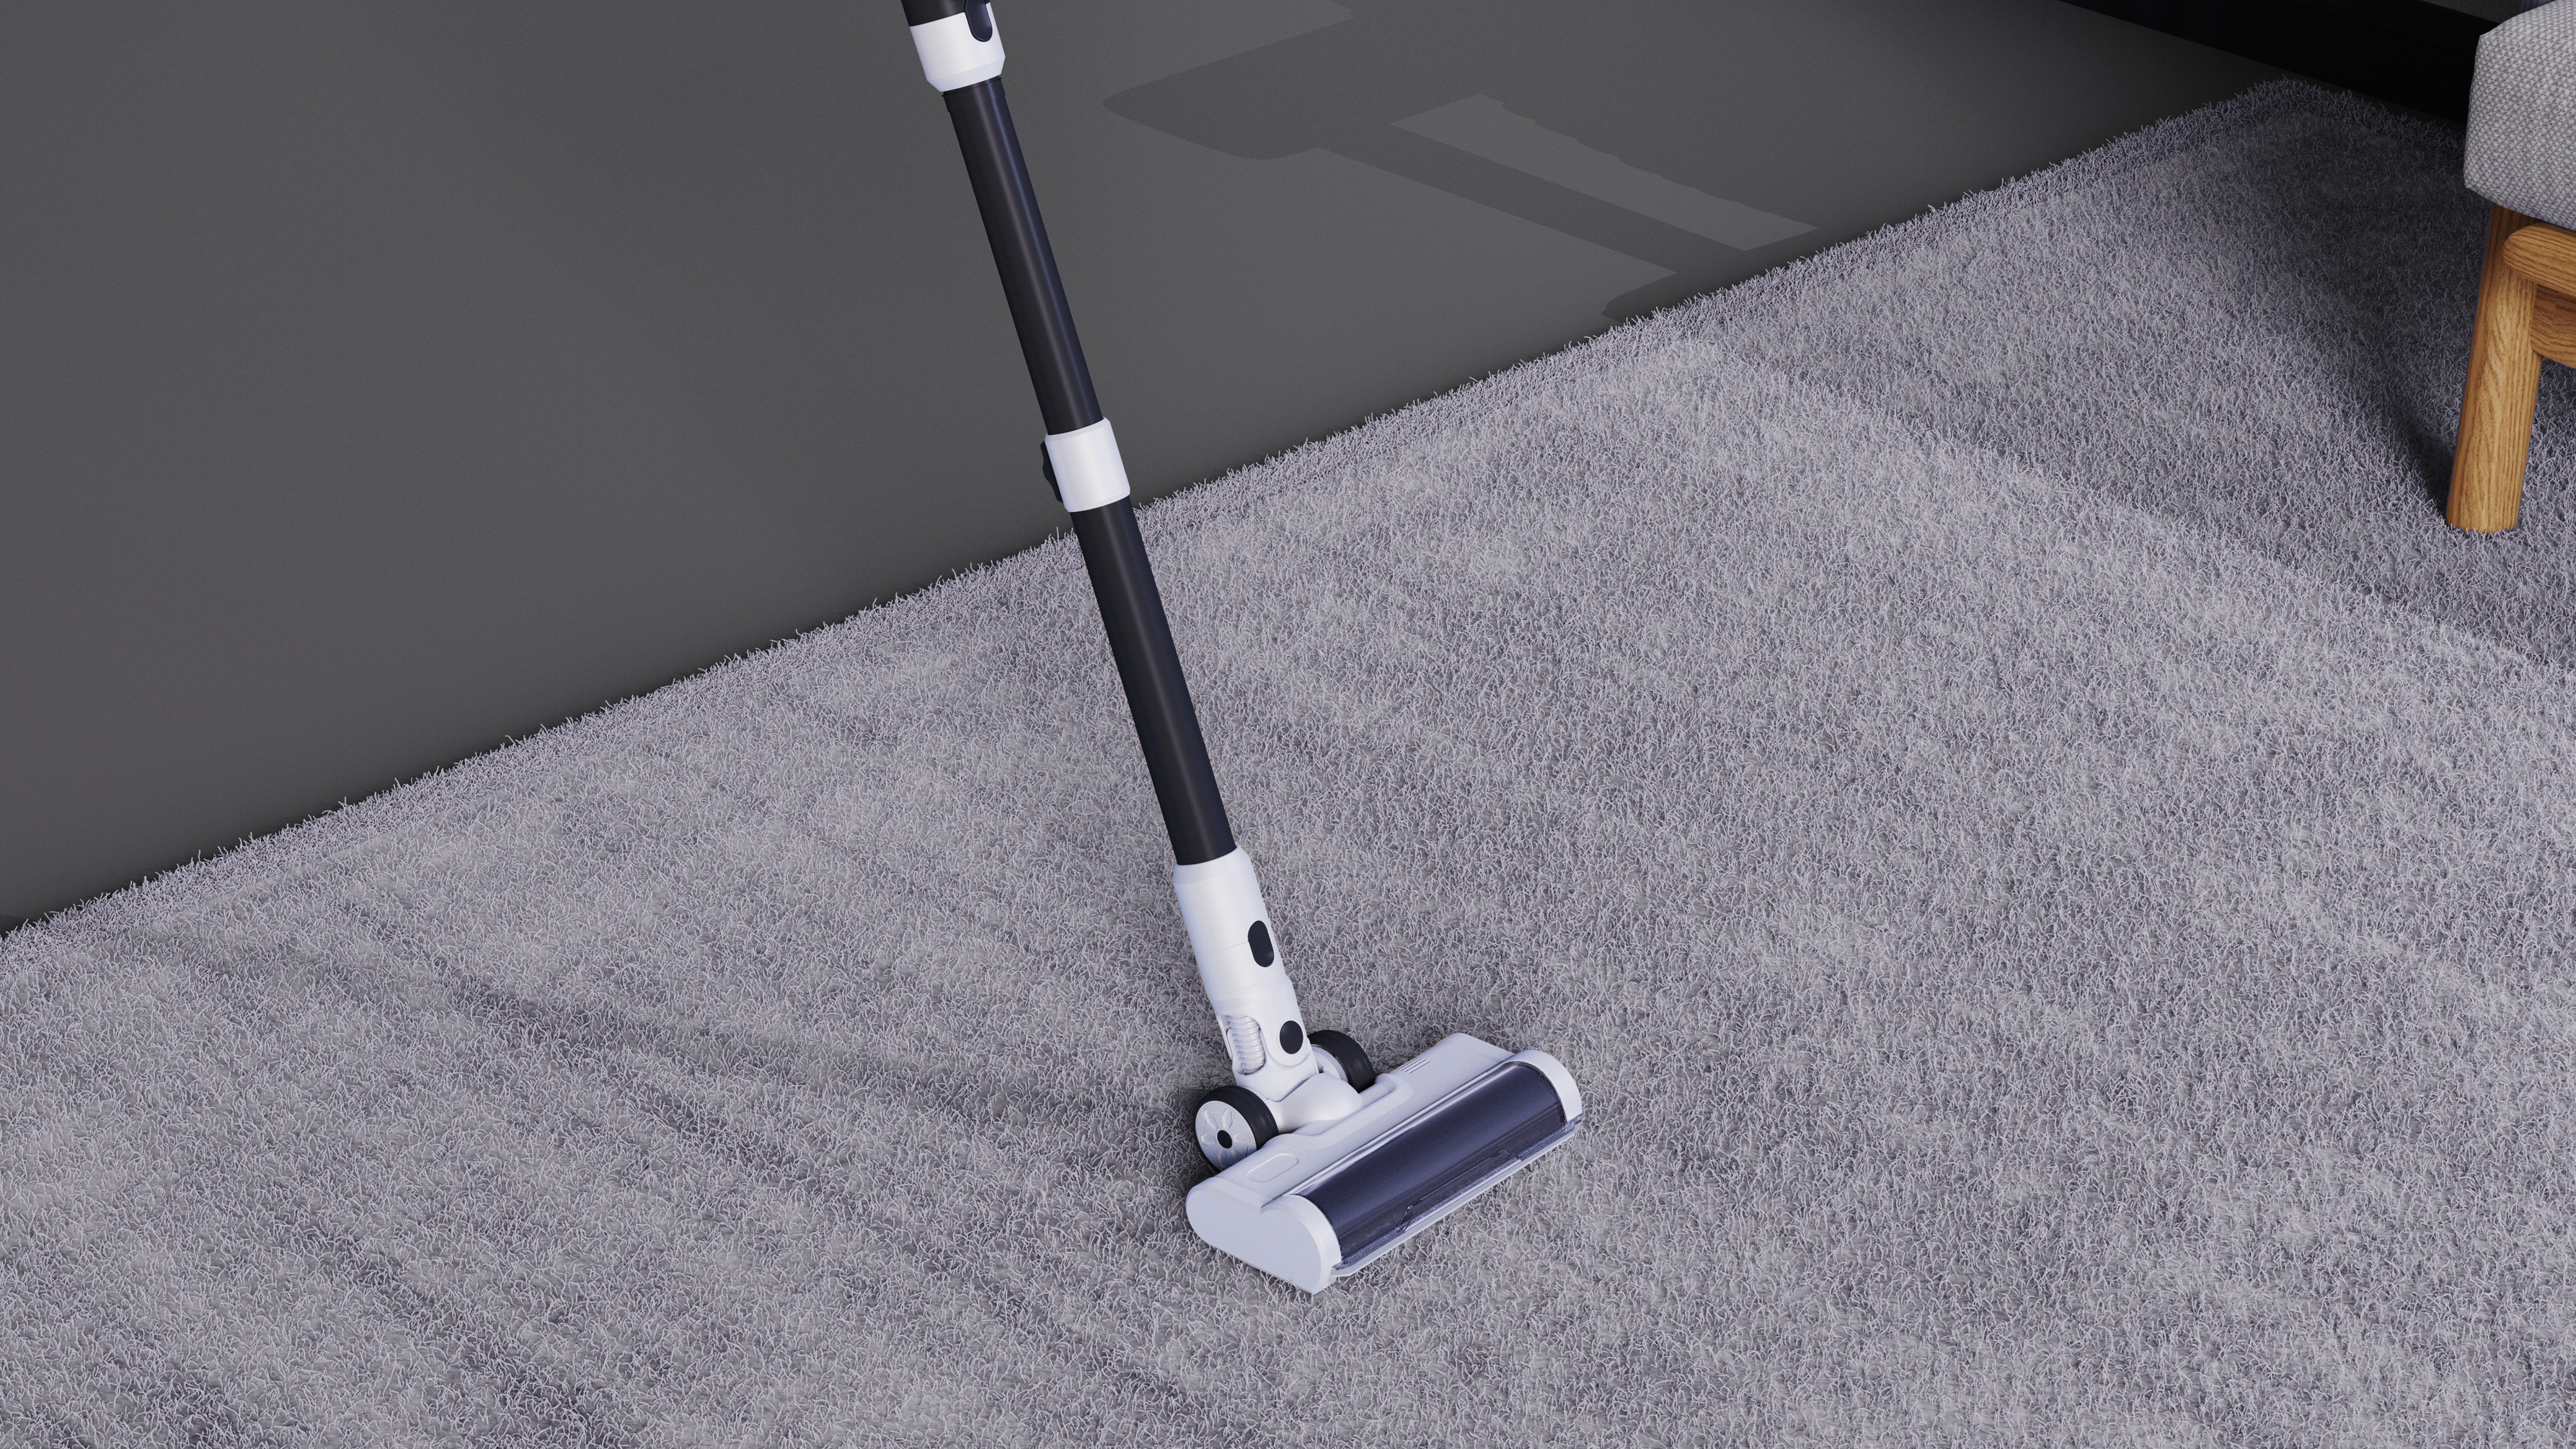 All-in-one Auto Empty Vacuum Cleaner